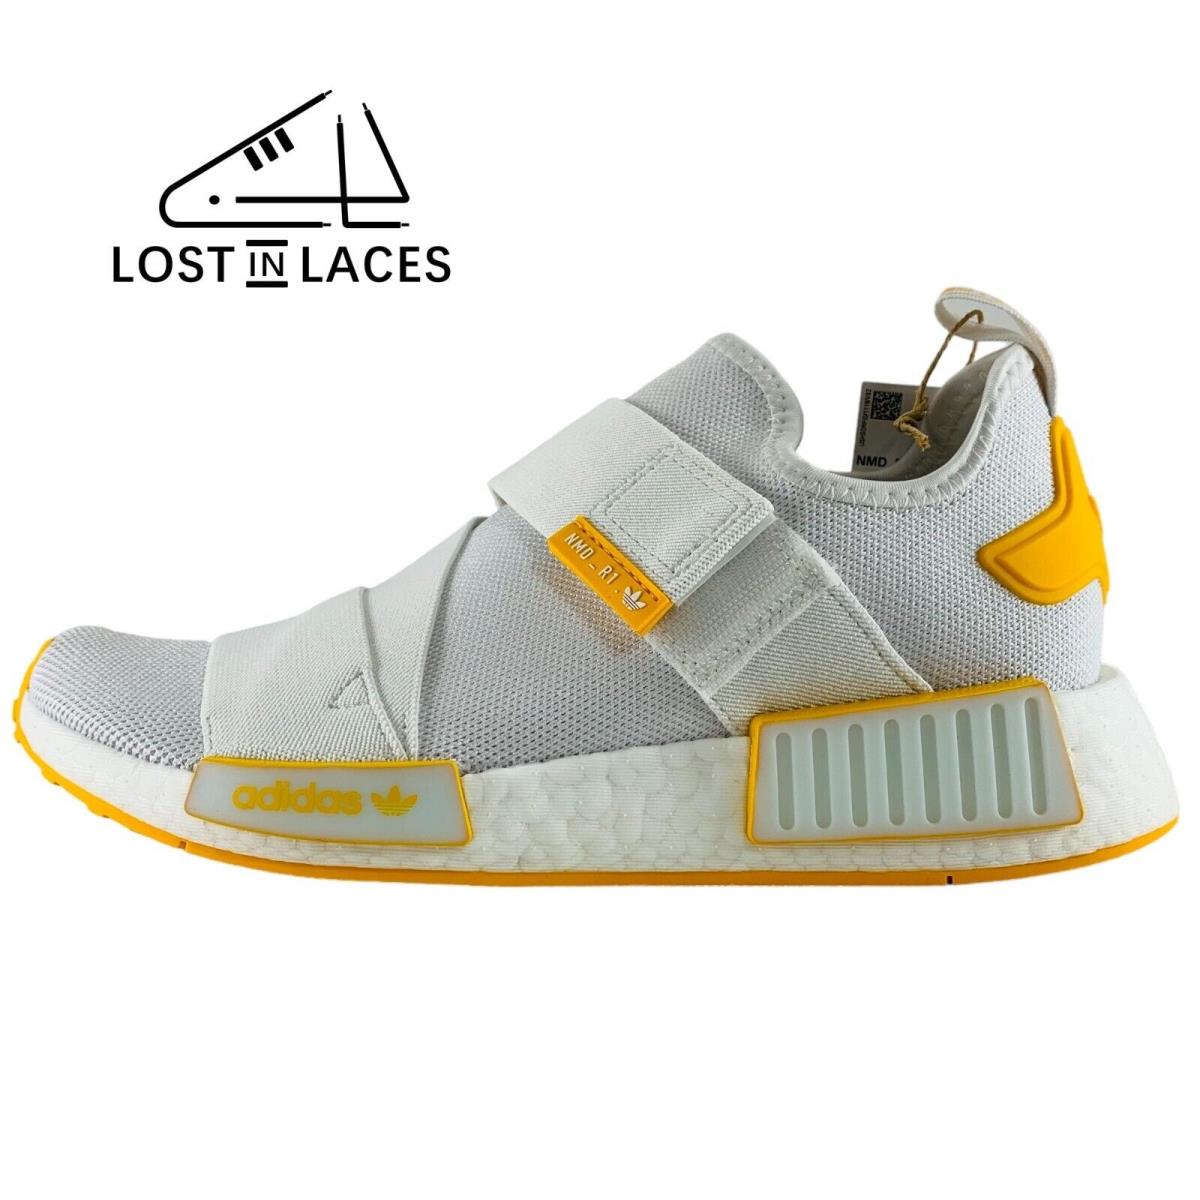 Adidas NMD_R1 Strap White Collegiate Gold Sneakers Shoes Women`s Sizes - White